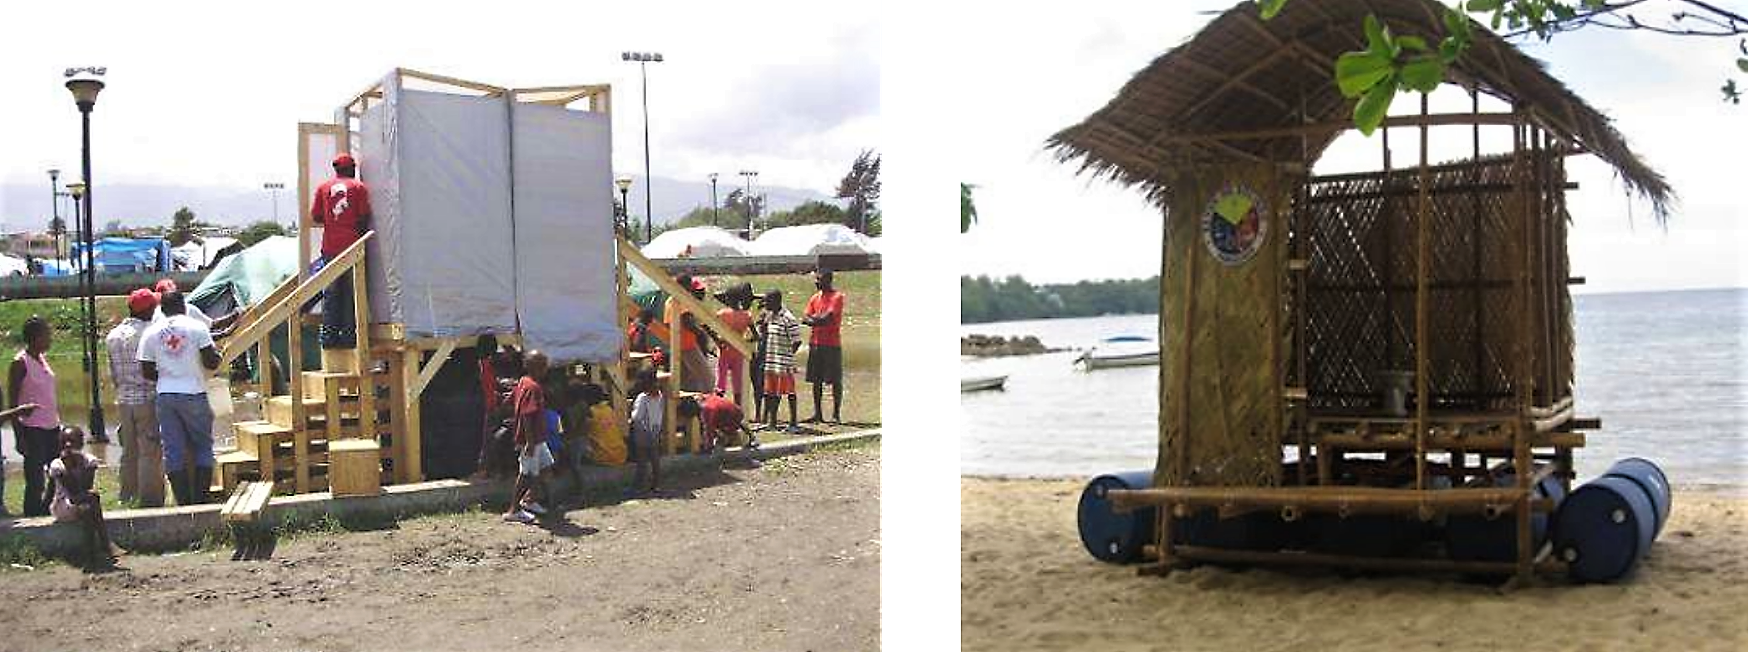 Raised latrine kit with container tanks as constructed by IFRC in the Haiti Earthquake response in 2010 (left) and a Floating Sanitary Toilet (FST) as introduced in Bolinao, Philippines (right). Source: IFRC (2011, left image) and PEN (2010, right image)